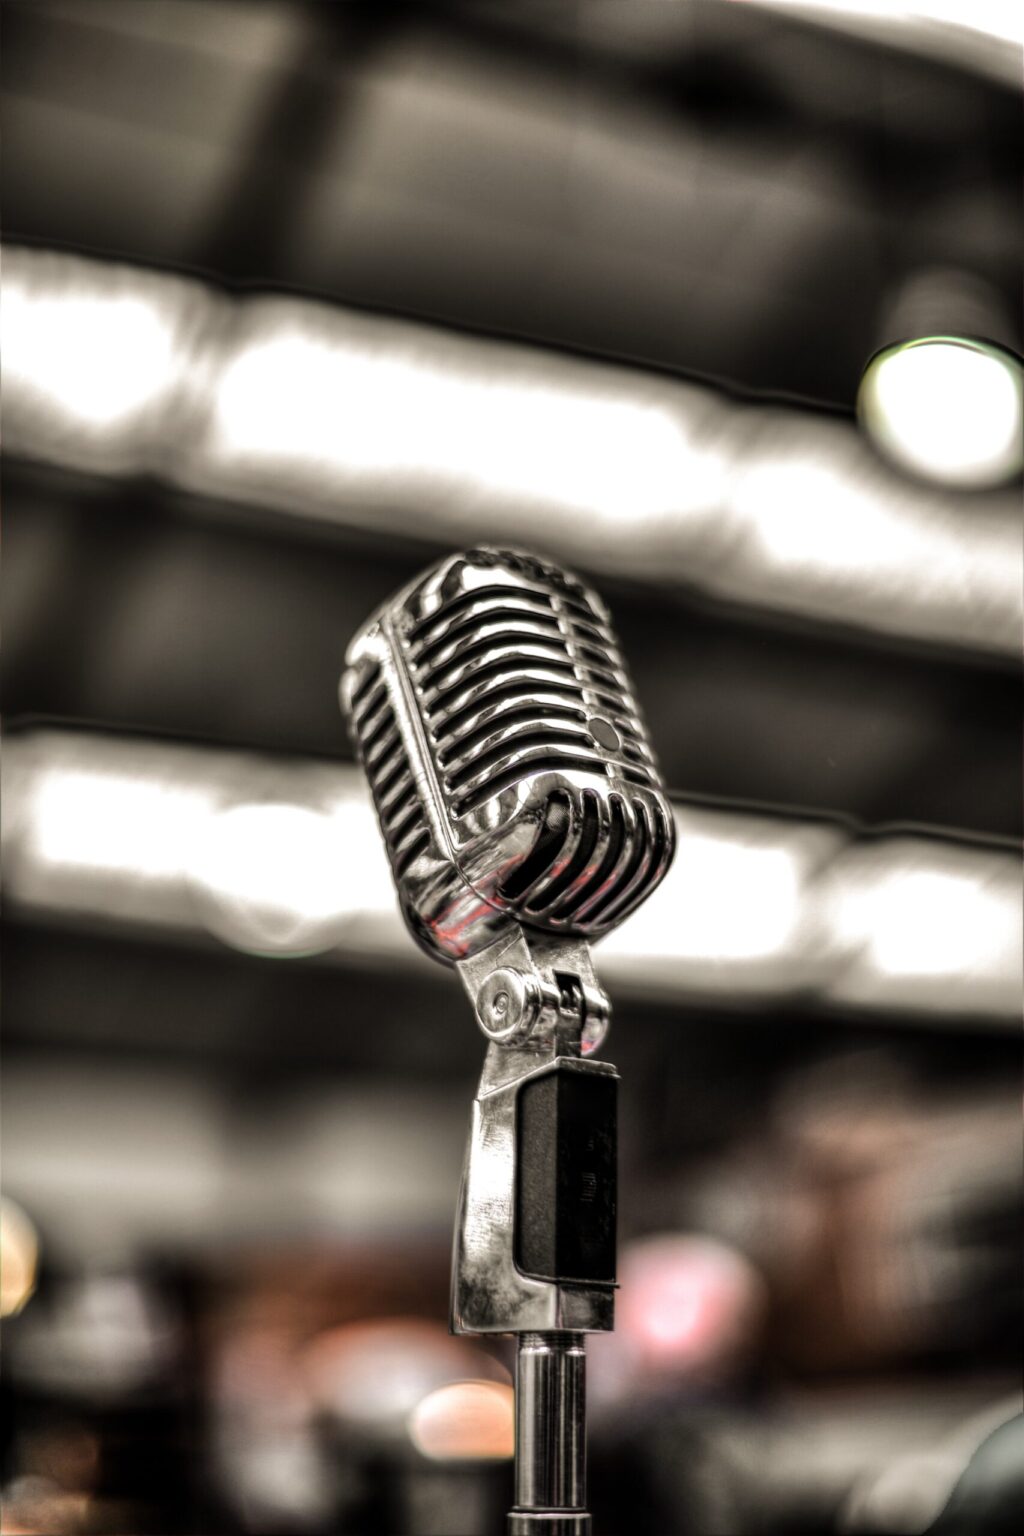 An old-fashioned microphone is shown in the foreground with a blurred background